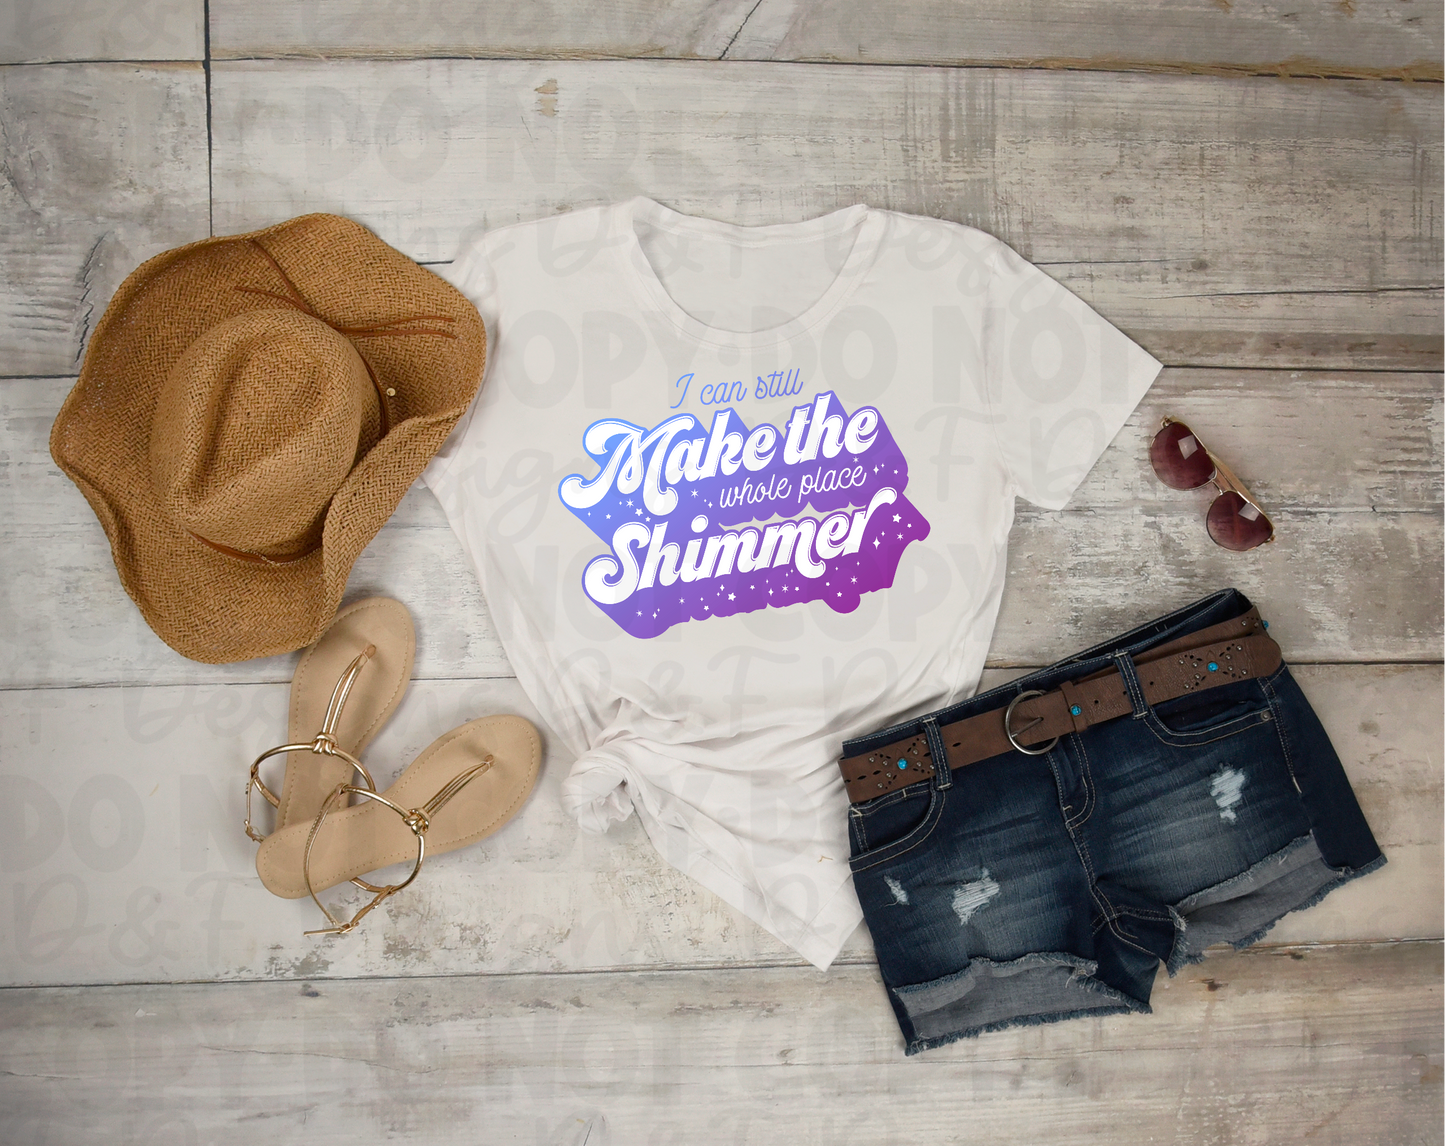 Make the Whole Place Shimmer Shirt